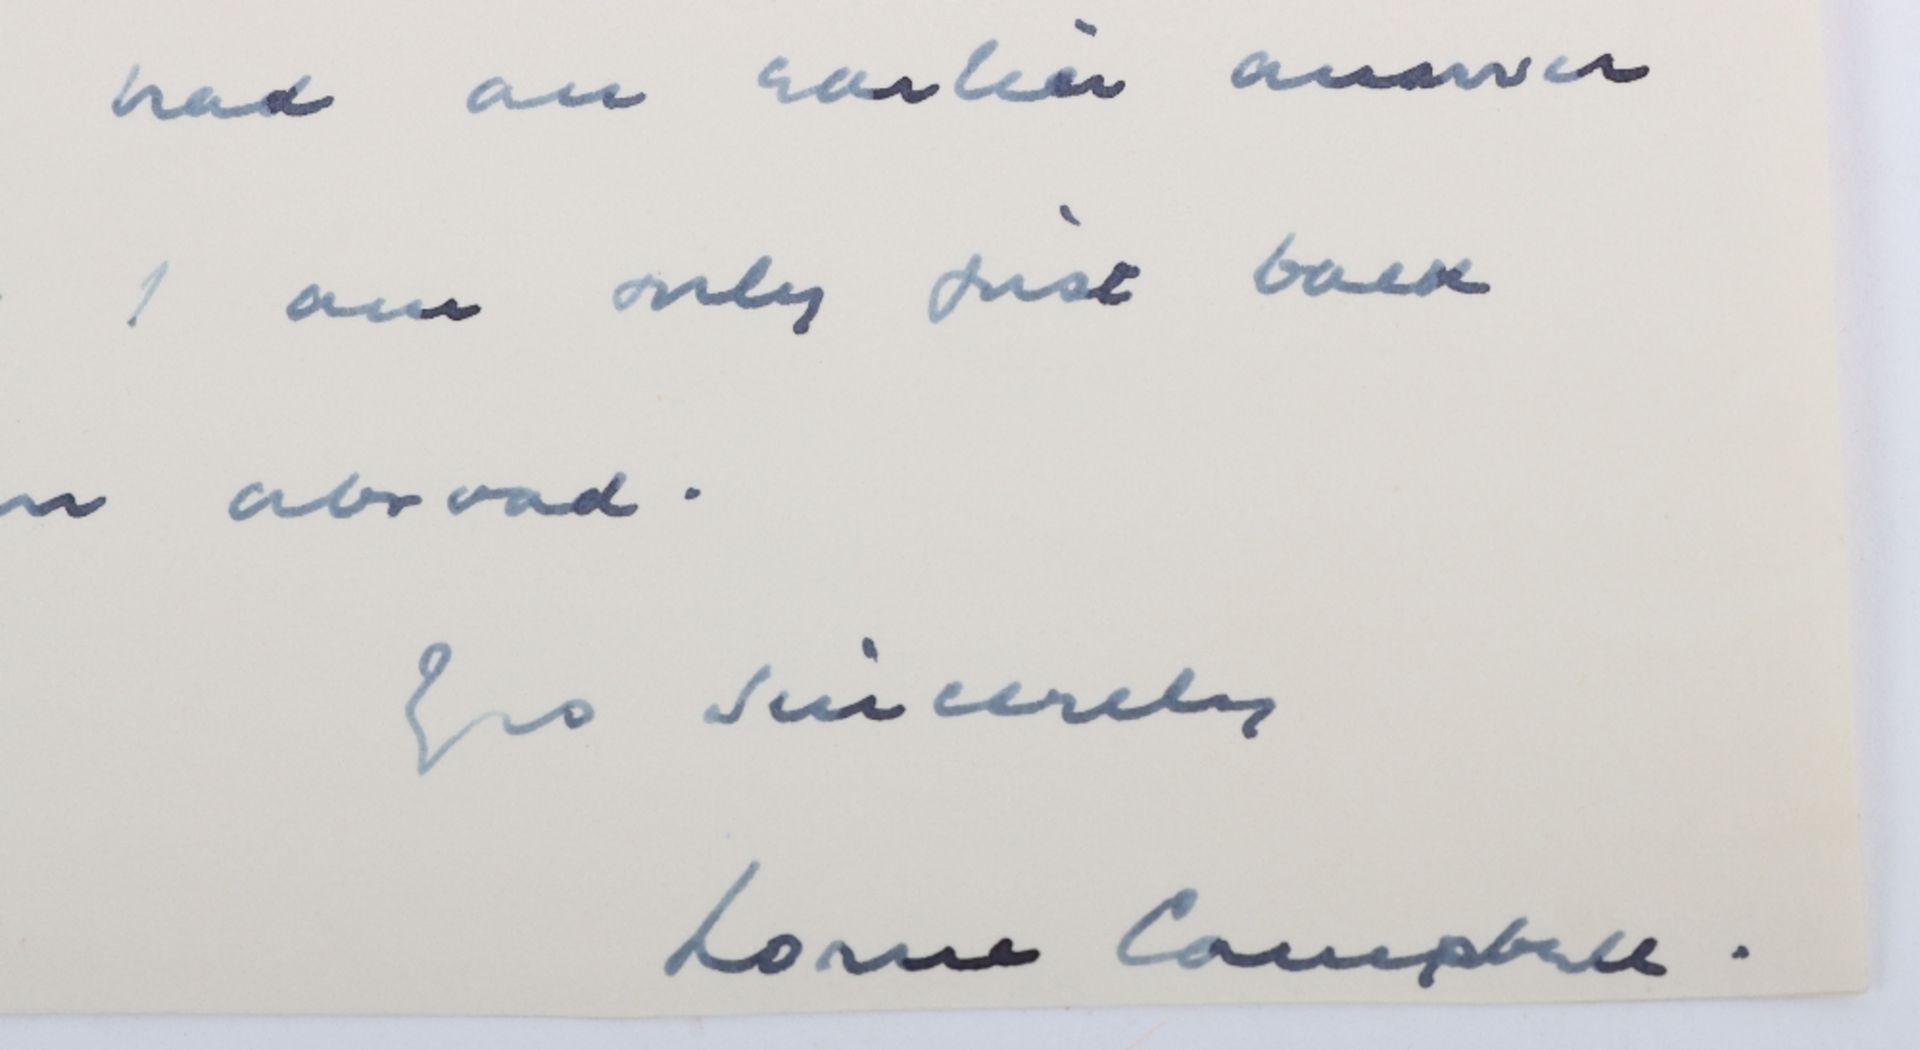 Signed Letter by Brigadier Lorne Campbell VC - Image 5 of 6